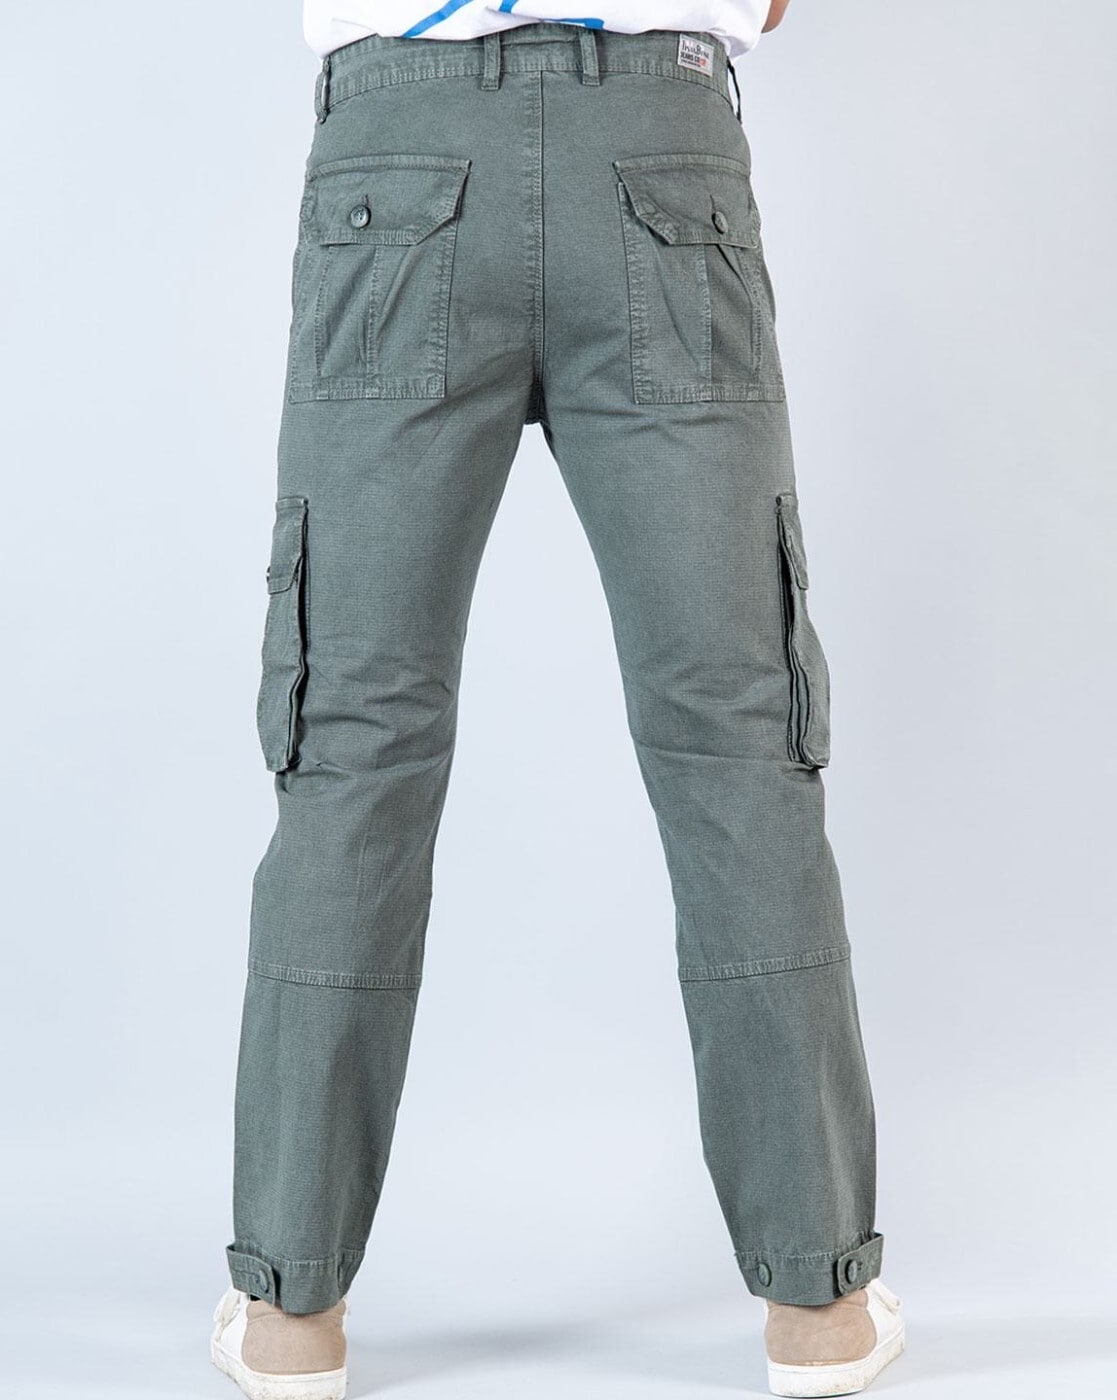 Buy Green Trousers & Pants for Men by Tistabene Online